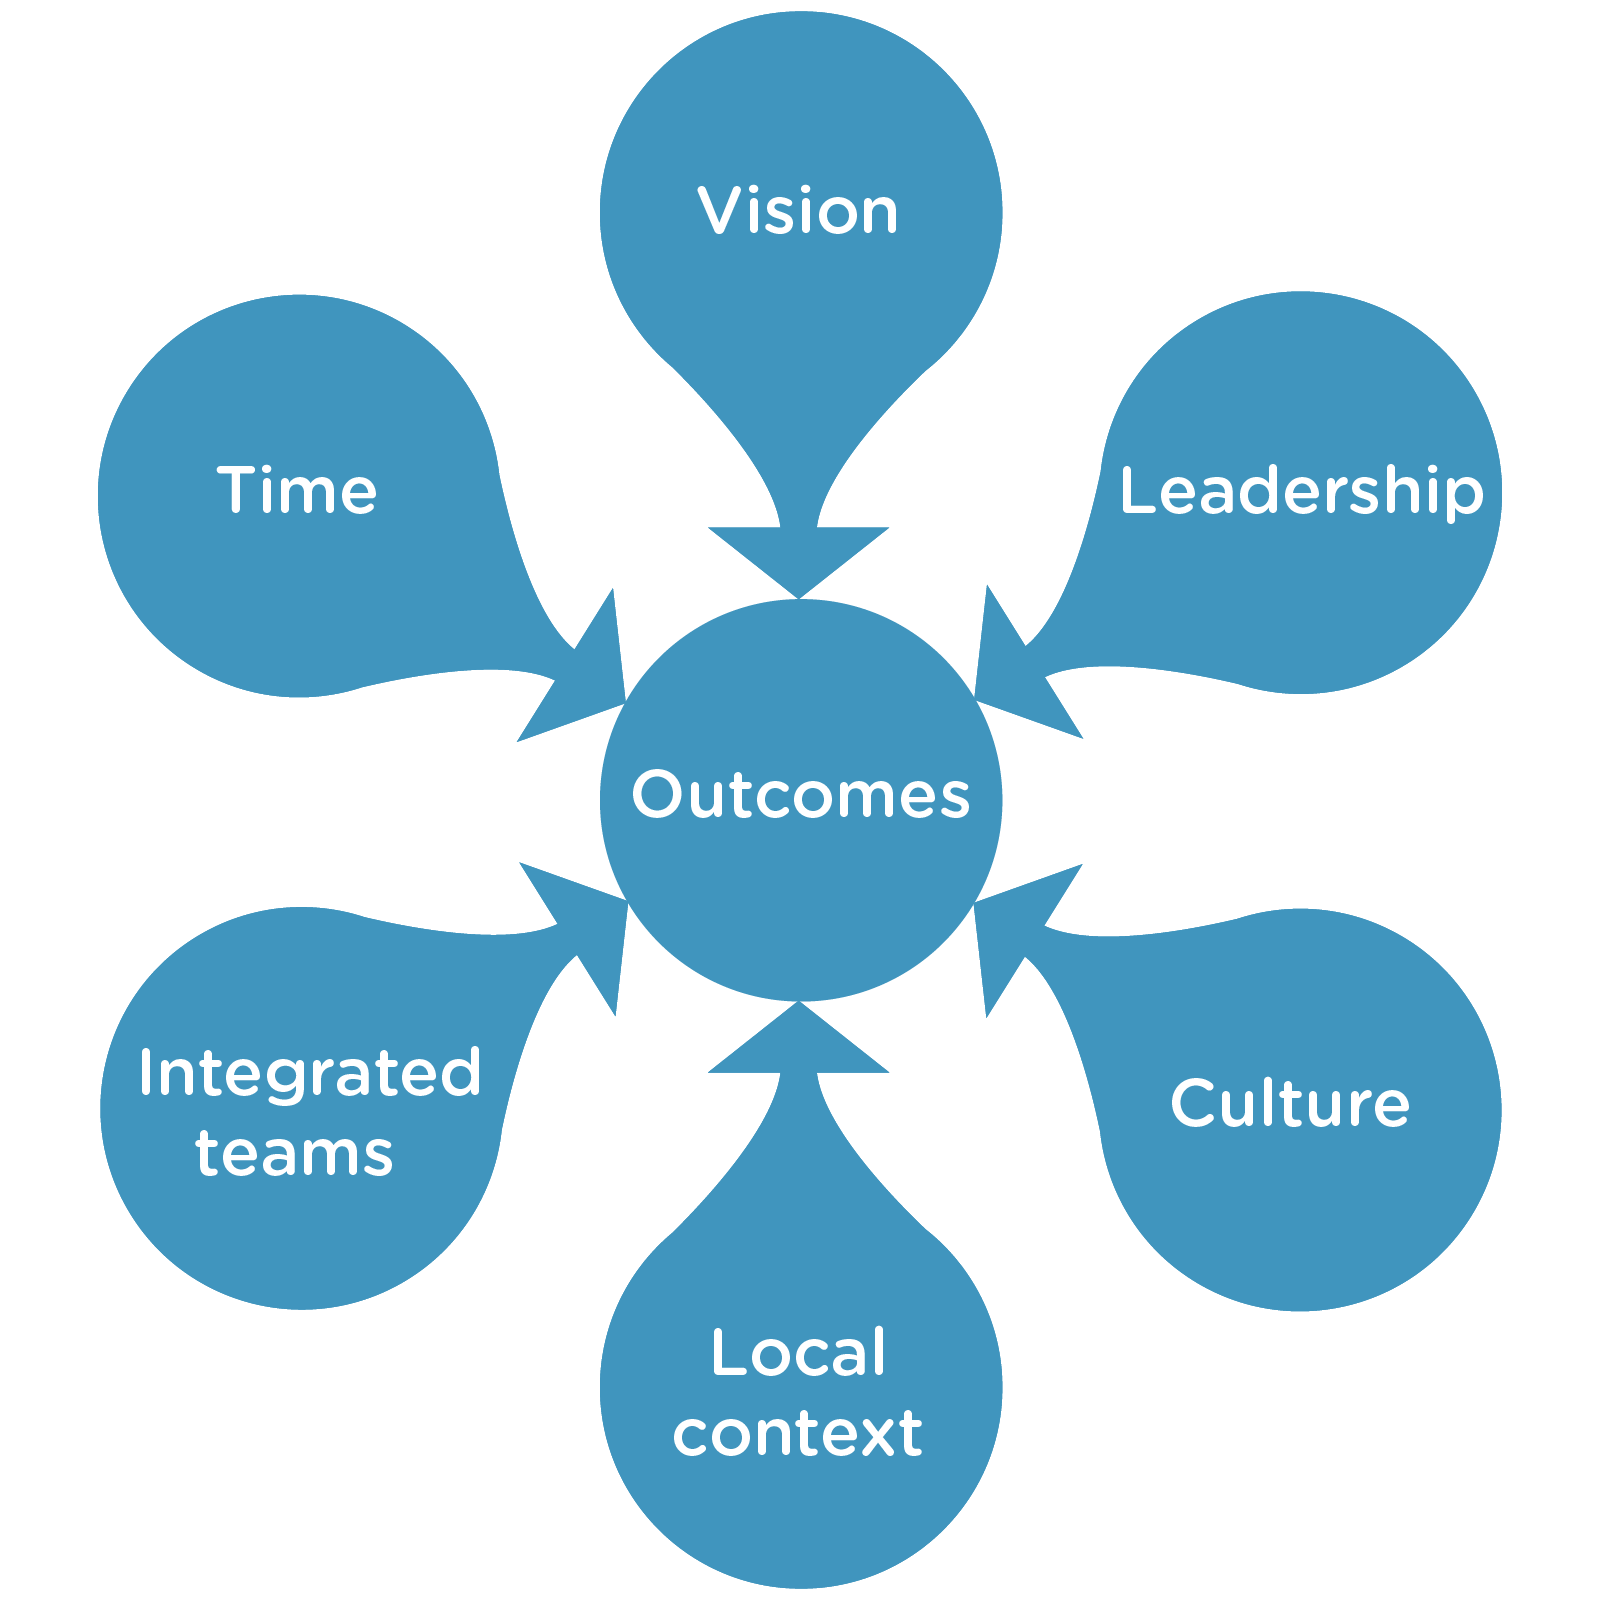 Dimensions of Outcomes diagram - Vision, Leadership,Culture,Local context,Integrated teams,Time all connecting to Outcomes at the center